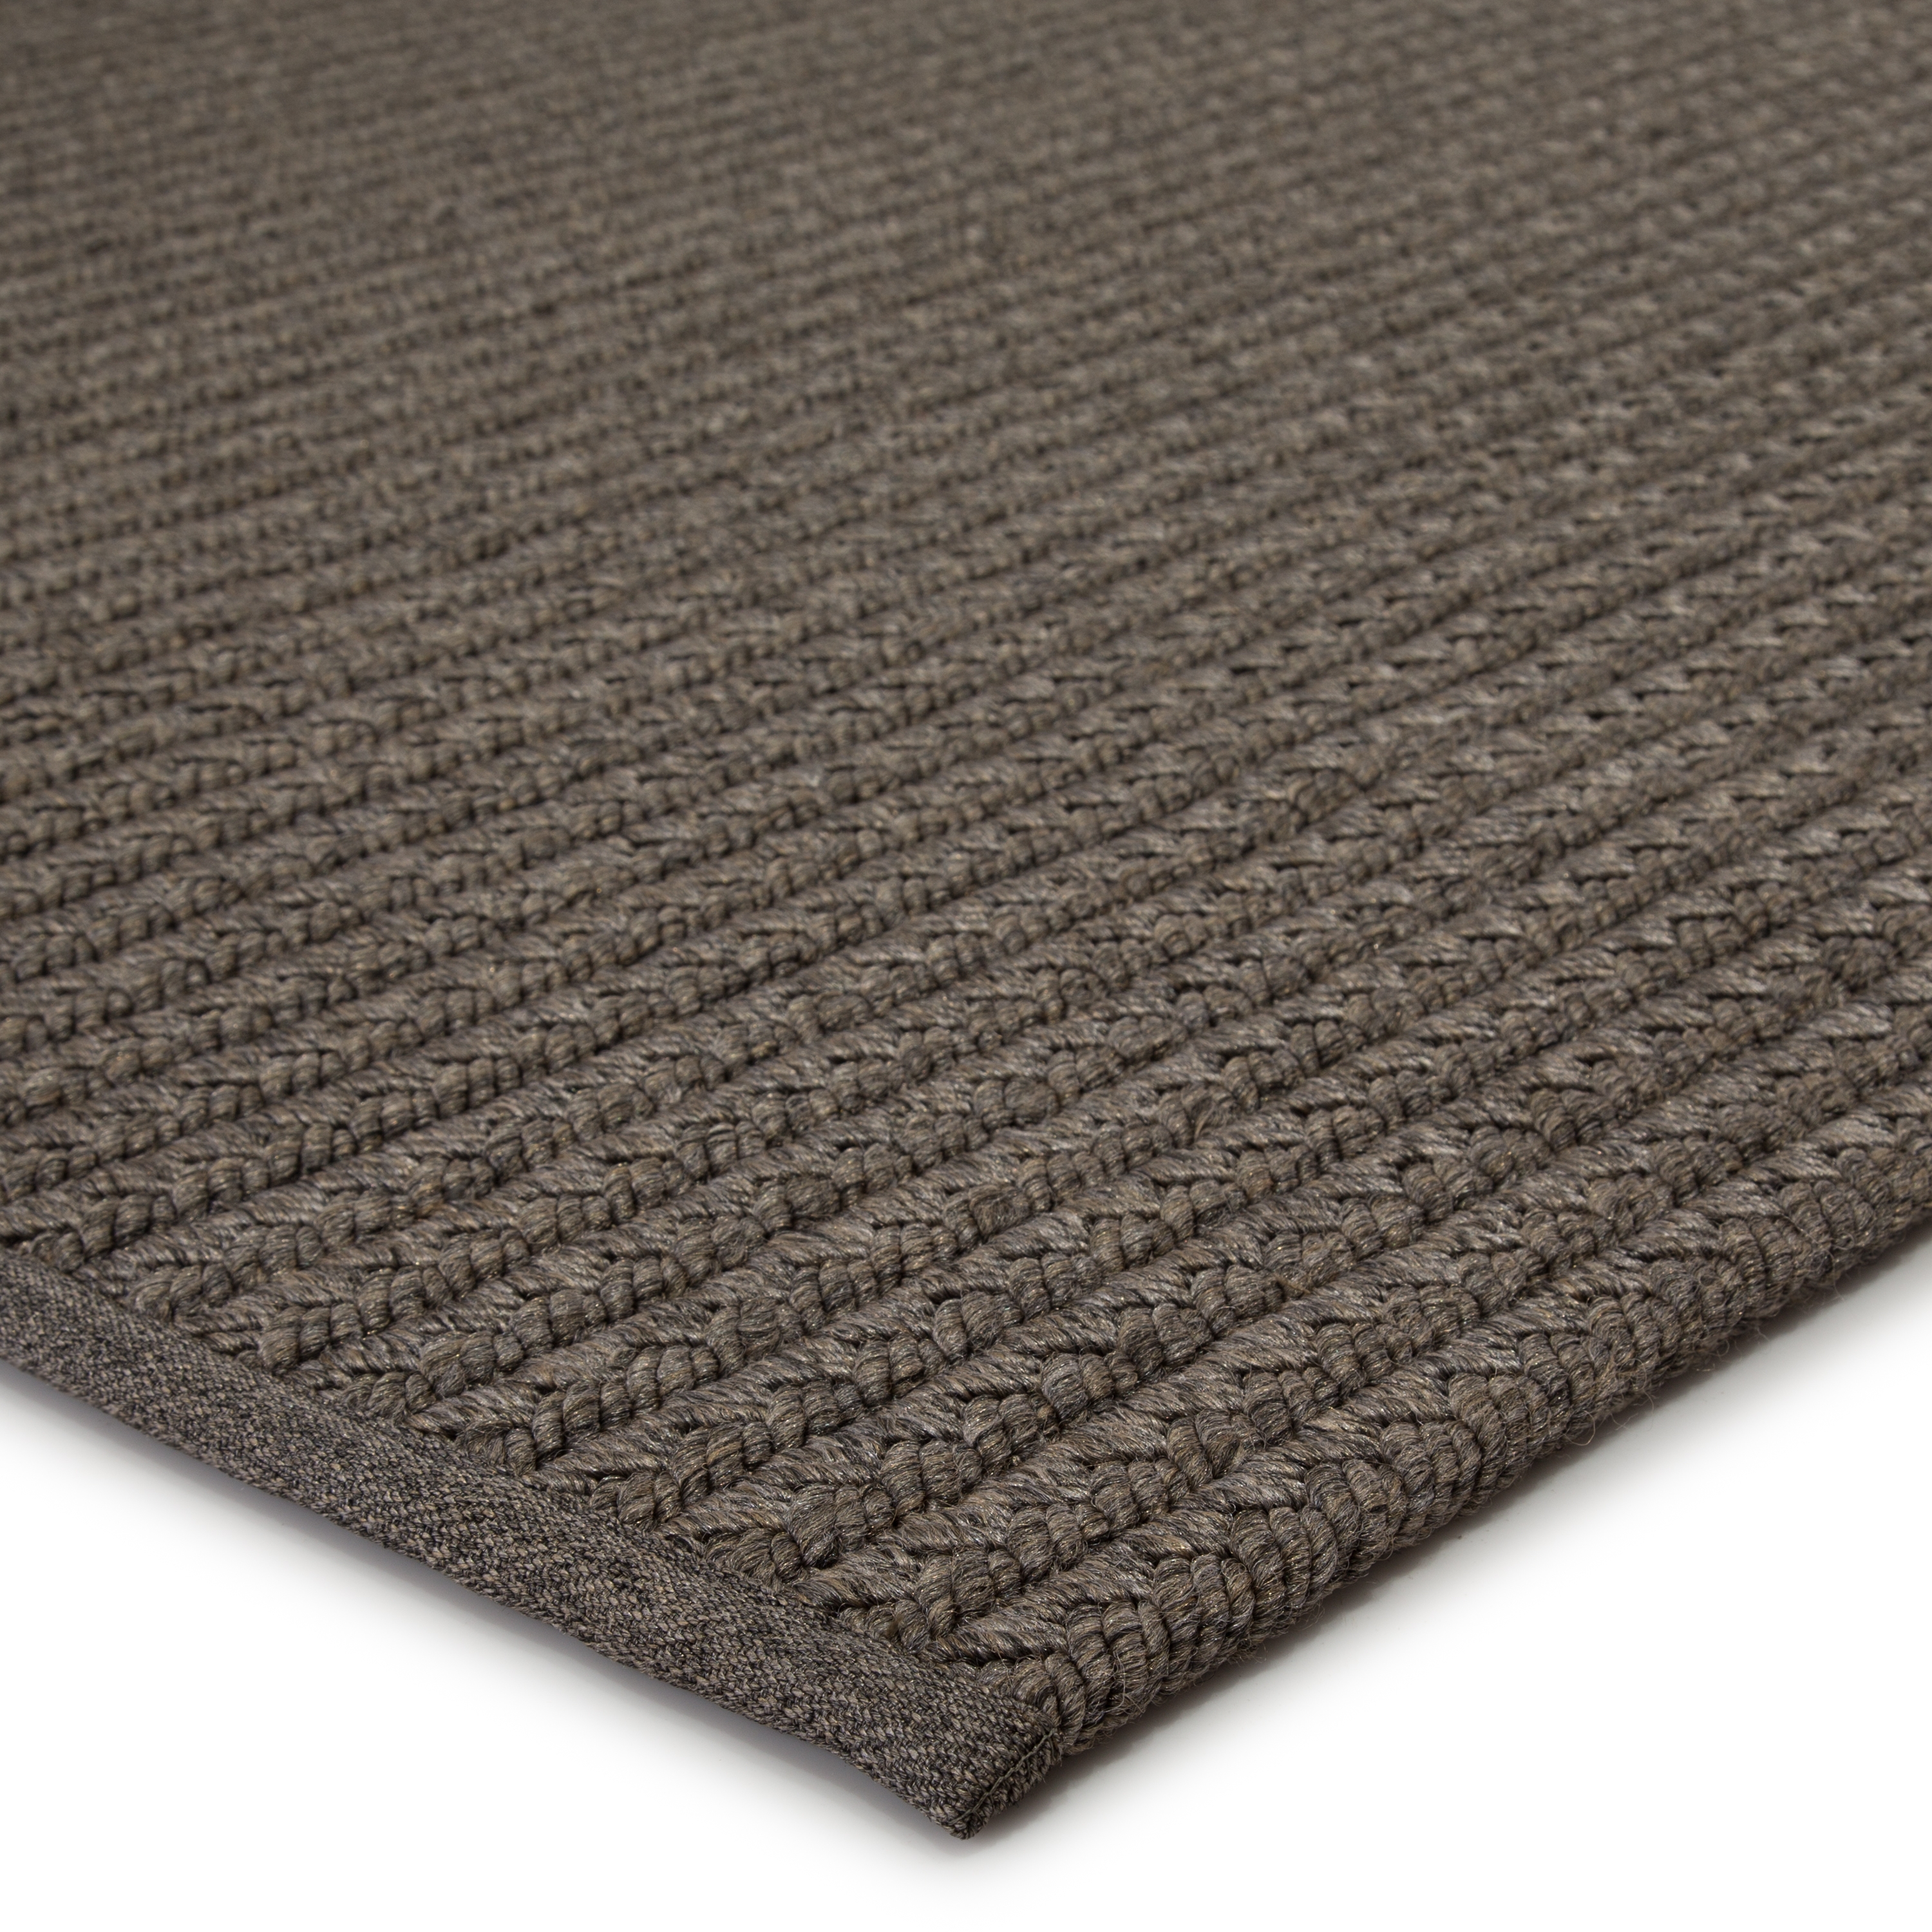 Iver Indoor/ Outdoor Solid Gray/ Taupe Area Rug (2'X3') - Image 1